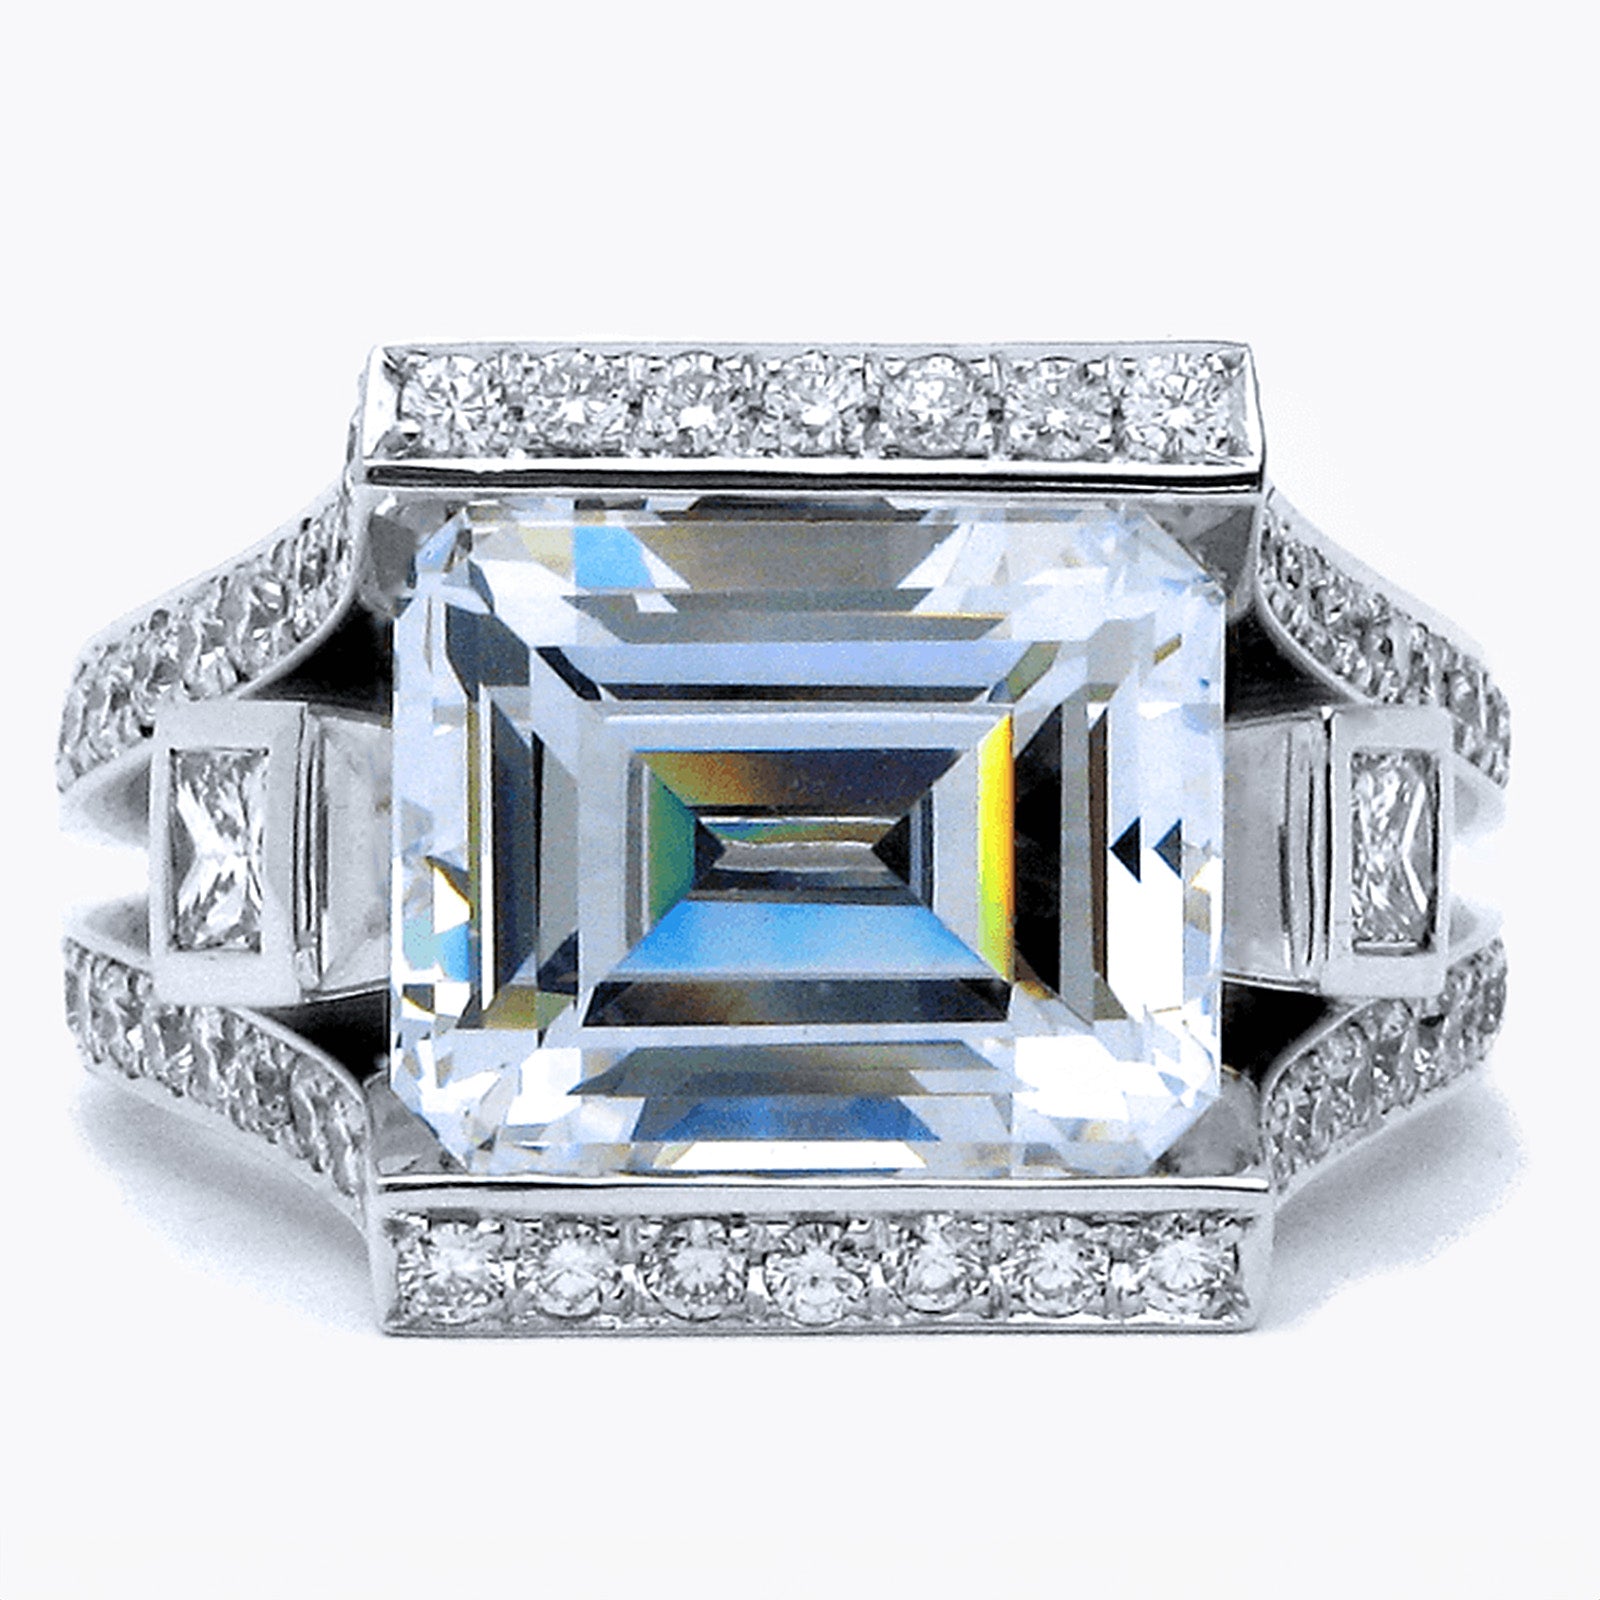 The ring is custom-designed by Garo Demirjian, and made with a large emerald-cut diamond in the center, surrounded by smaller diamonds and the ring is on a white background. 